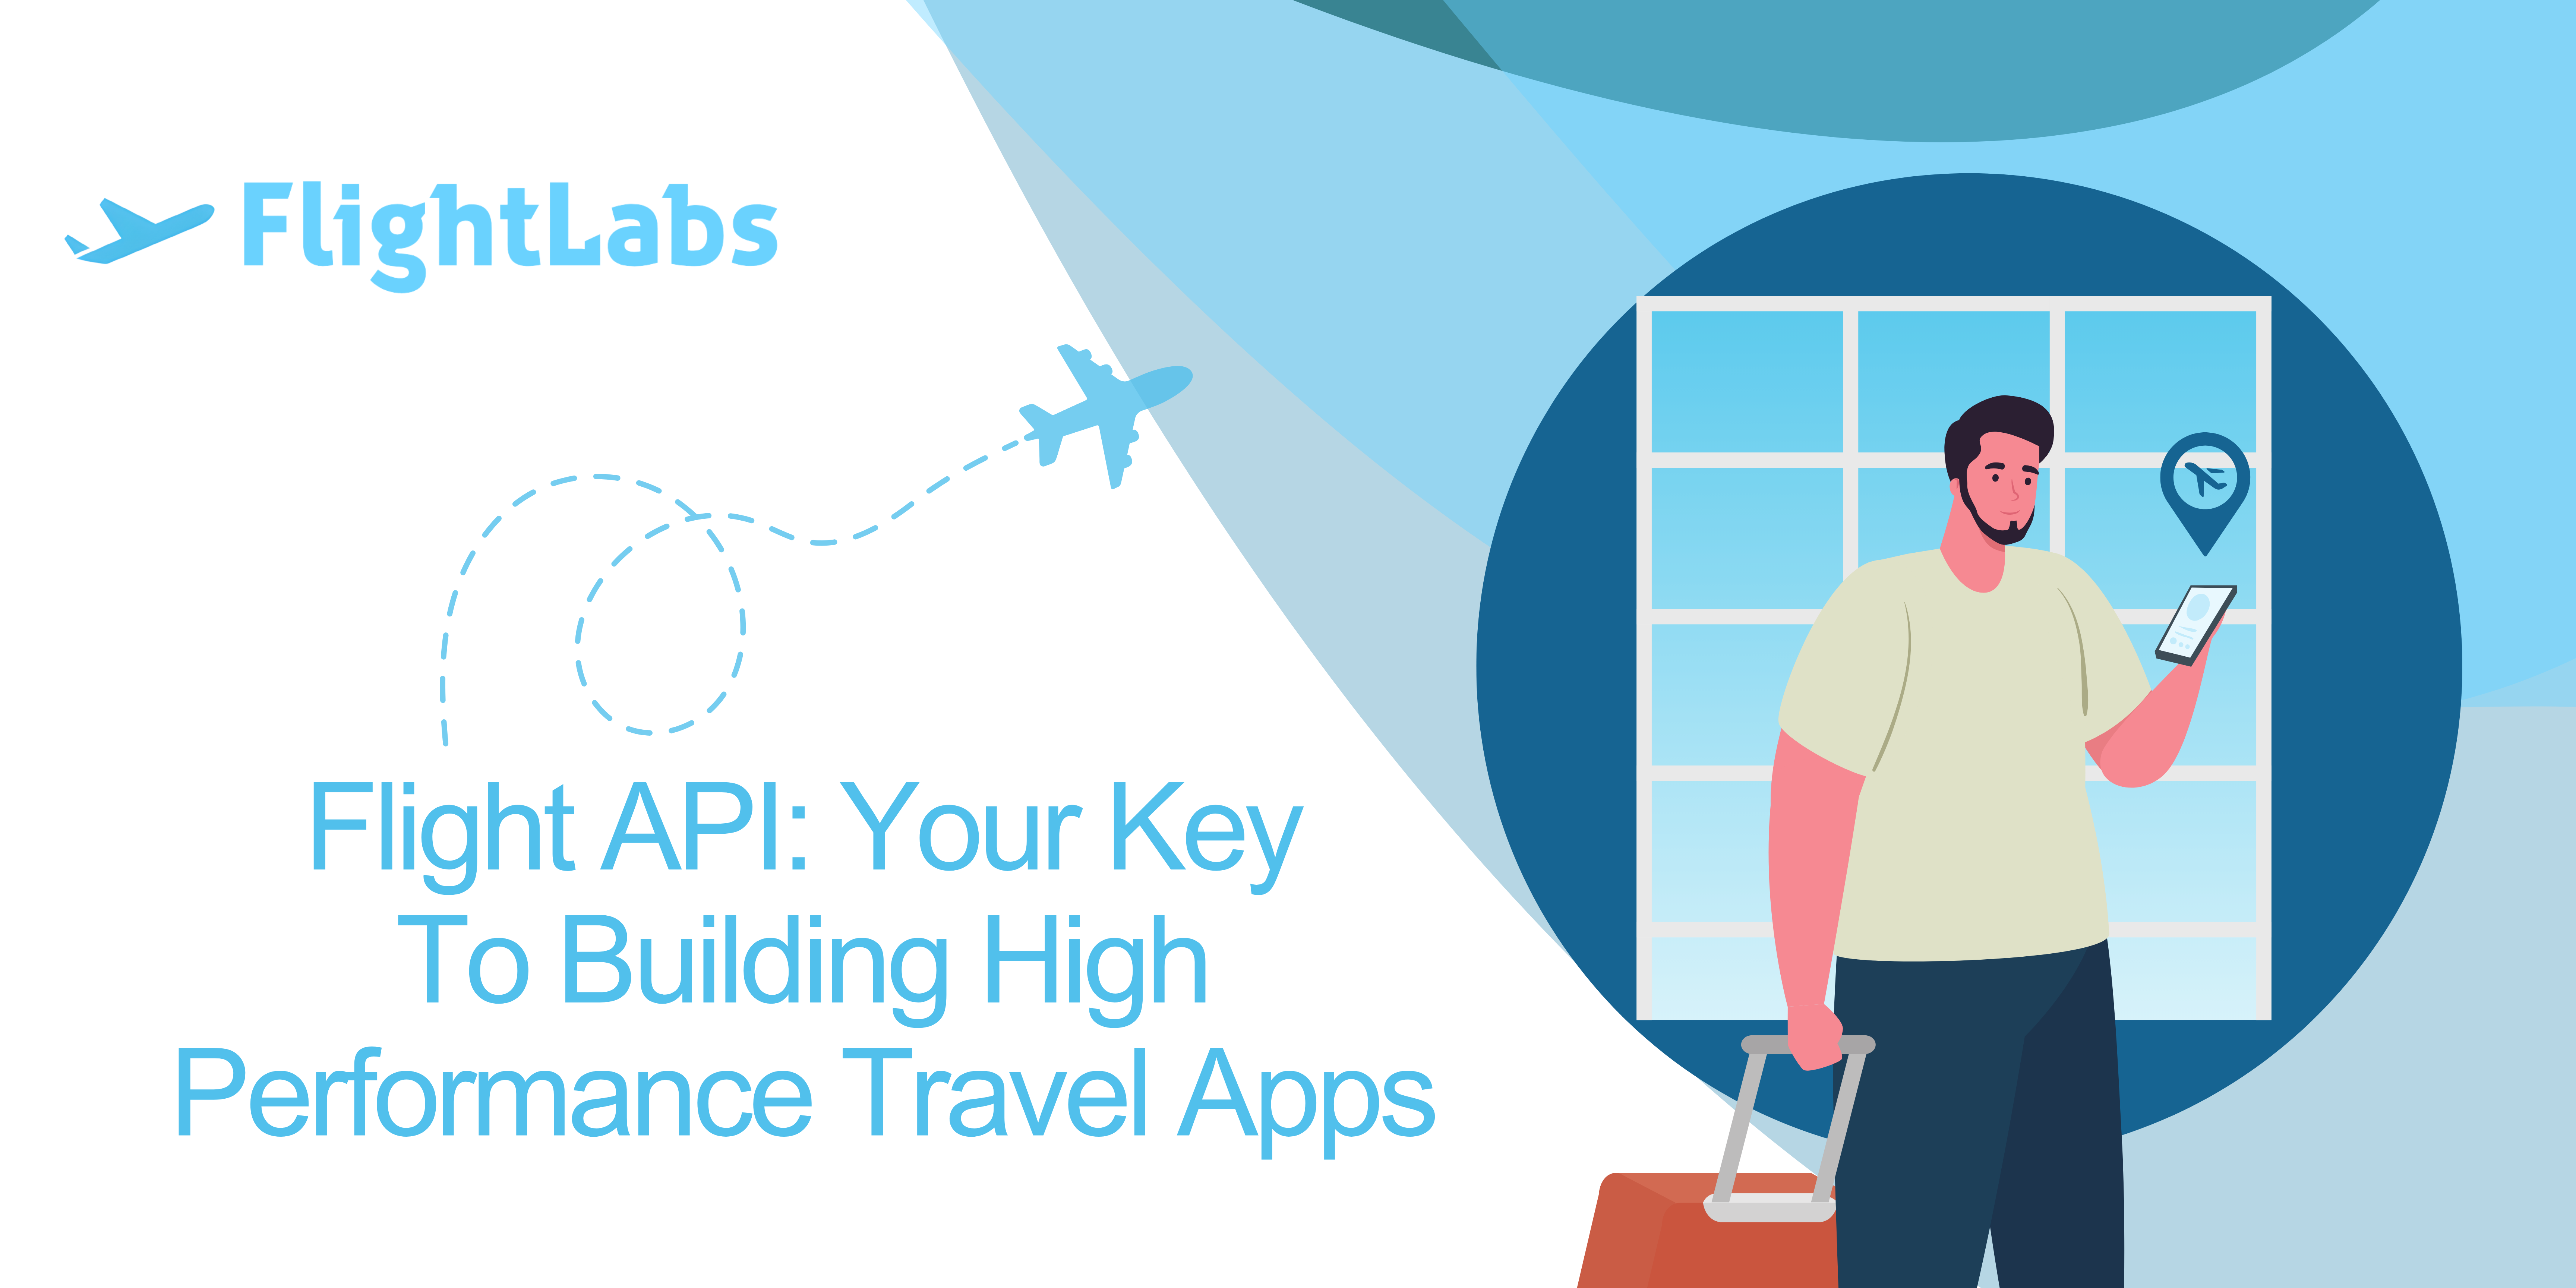 Flight API: Your Key To Building High Performance Travel Apps